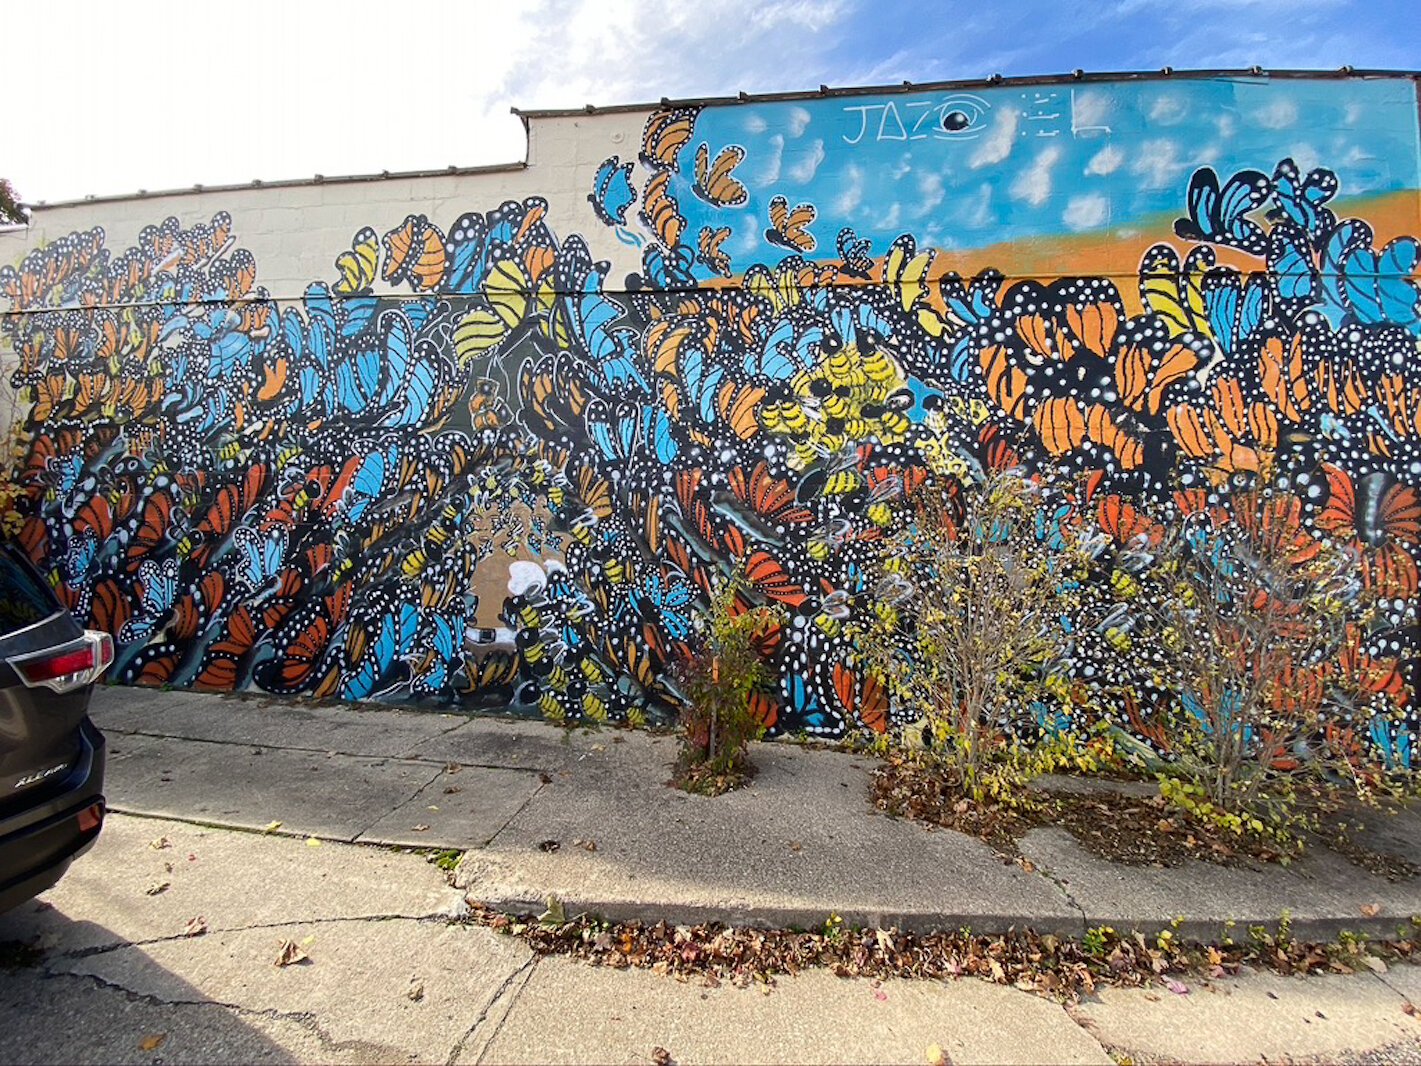 Jaziel Pugh's butterfly mural was painted 2017 and can be found at 20th Street and Territorial Road.